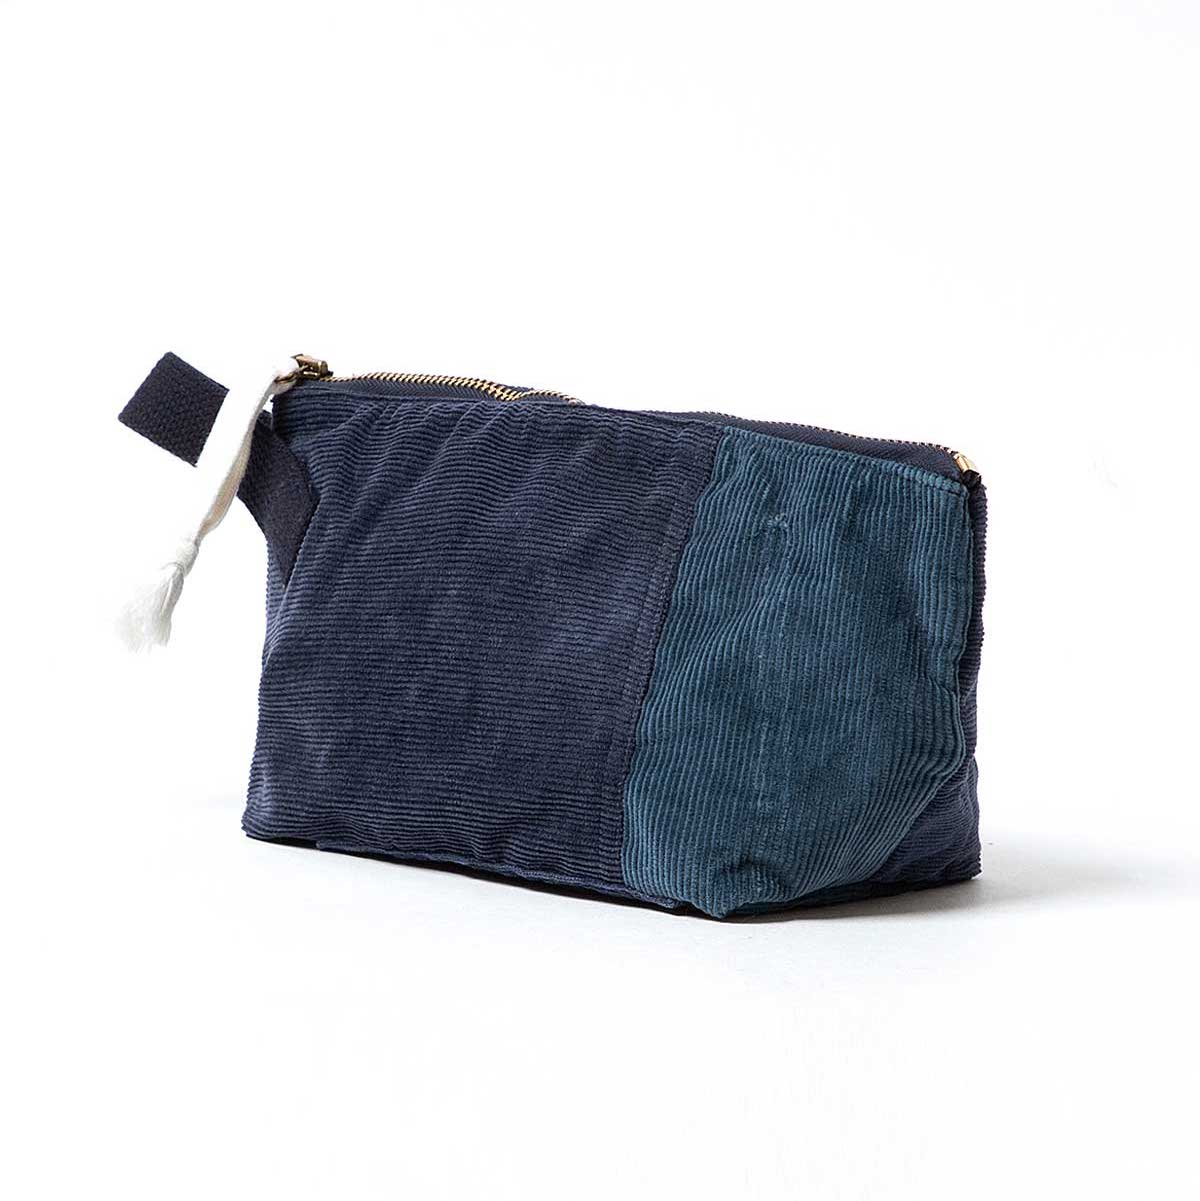 HOBO / TOUR POUCH UPCYCLED CORDUROY (Navy)